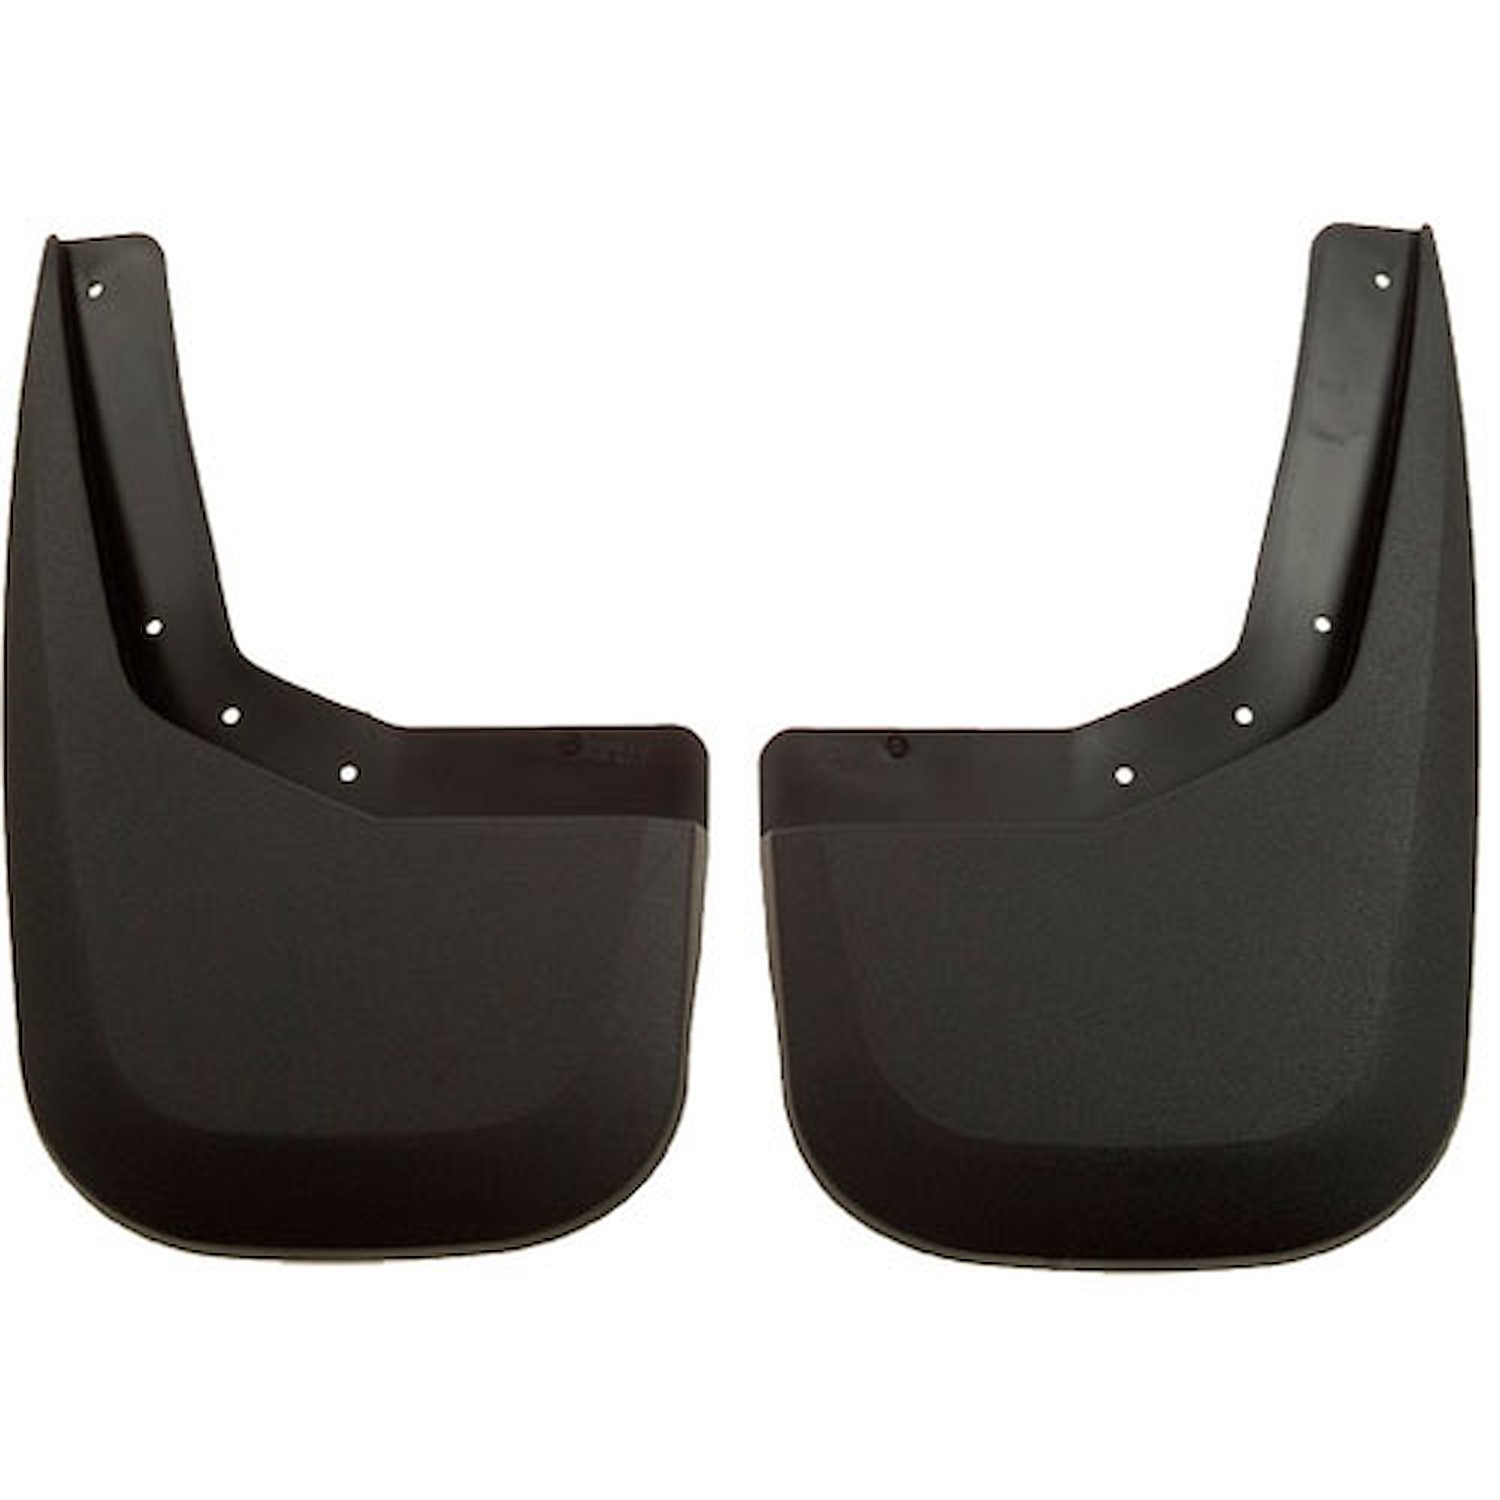 Custom Molded Mud Guards 2004-2012 Colorado/Canyon with OE Fender Flares